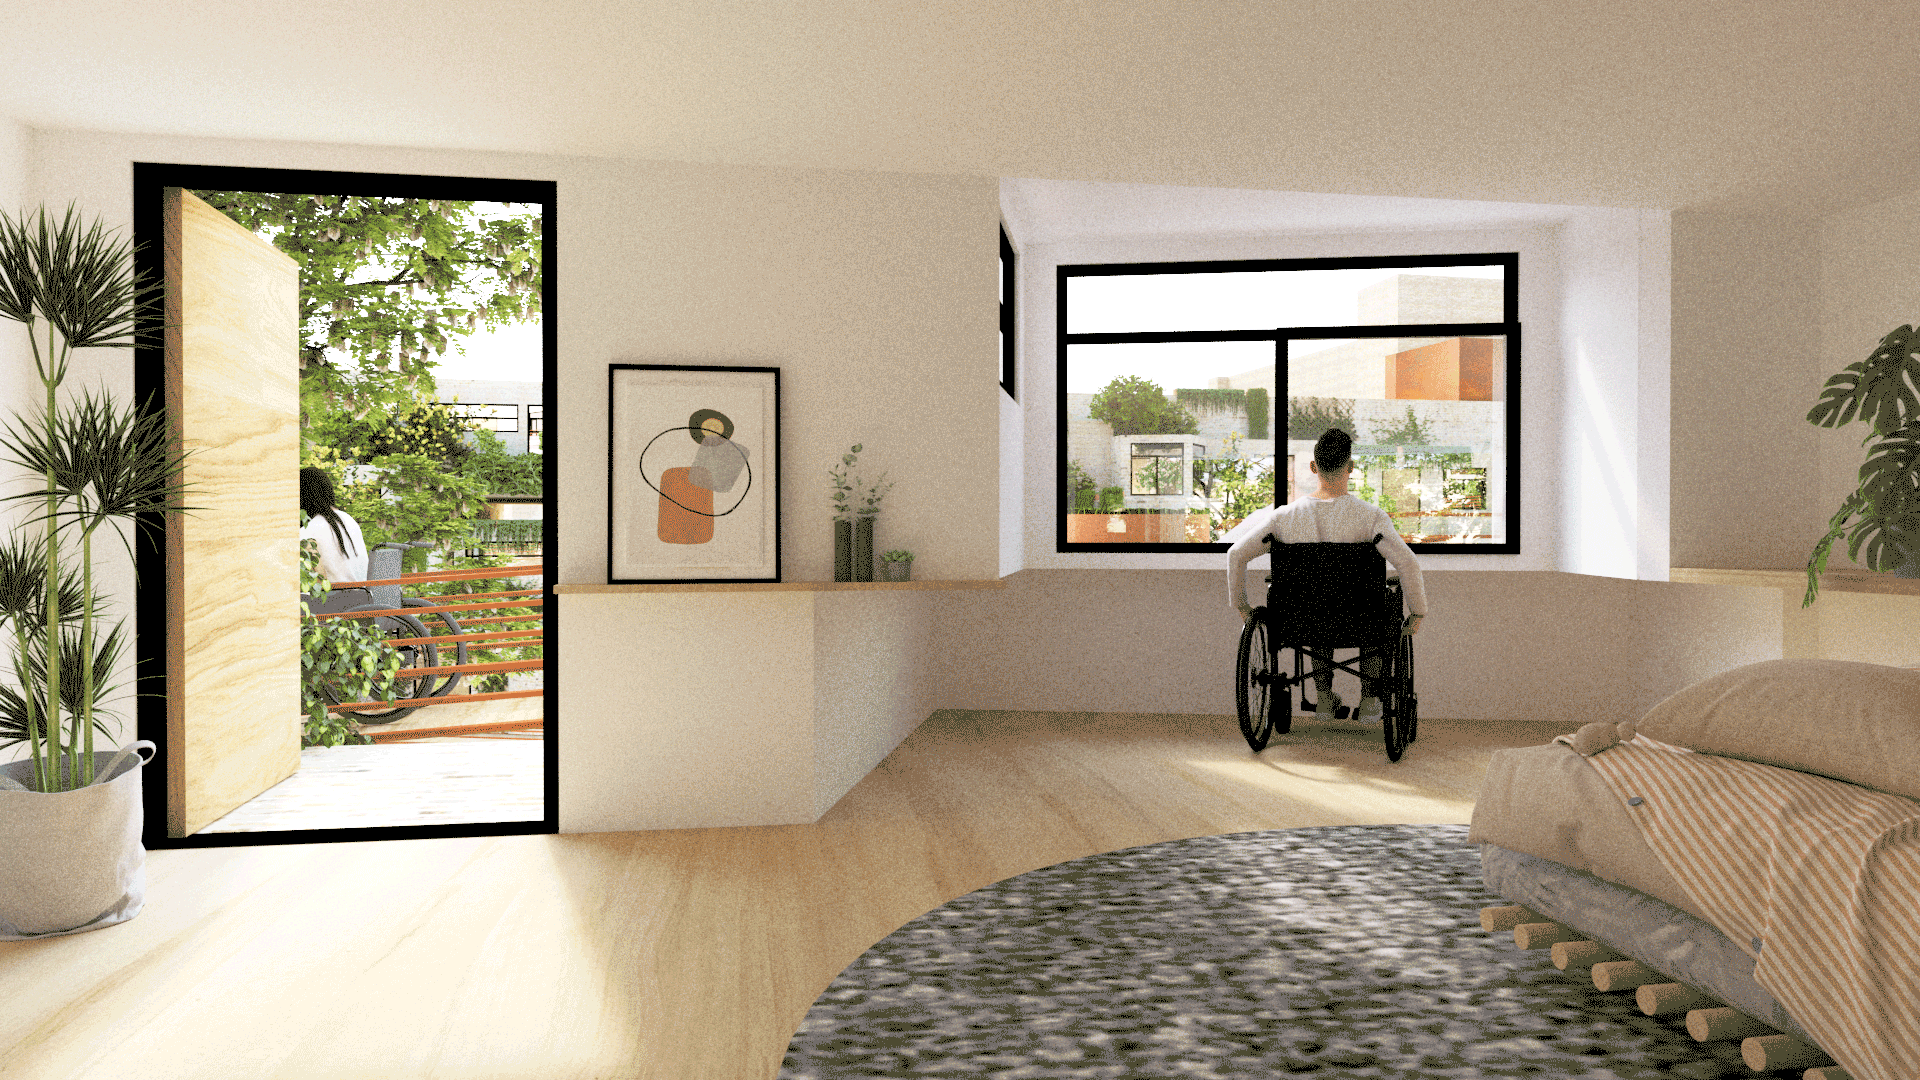 image from shaina yang's architecture thesis on disability and architecture